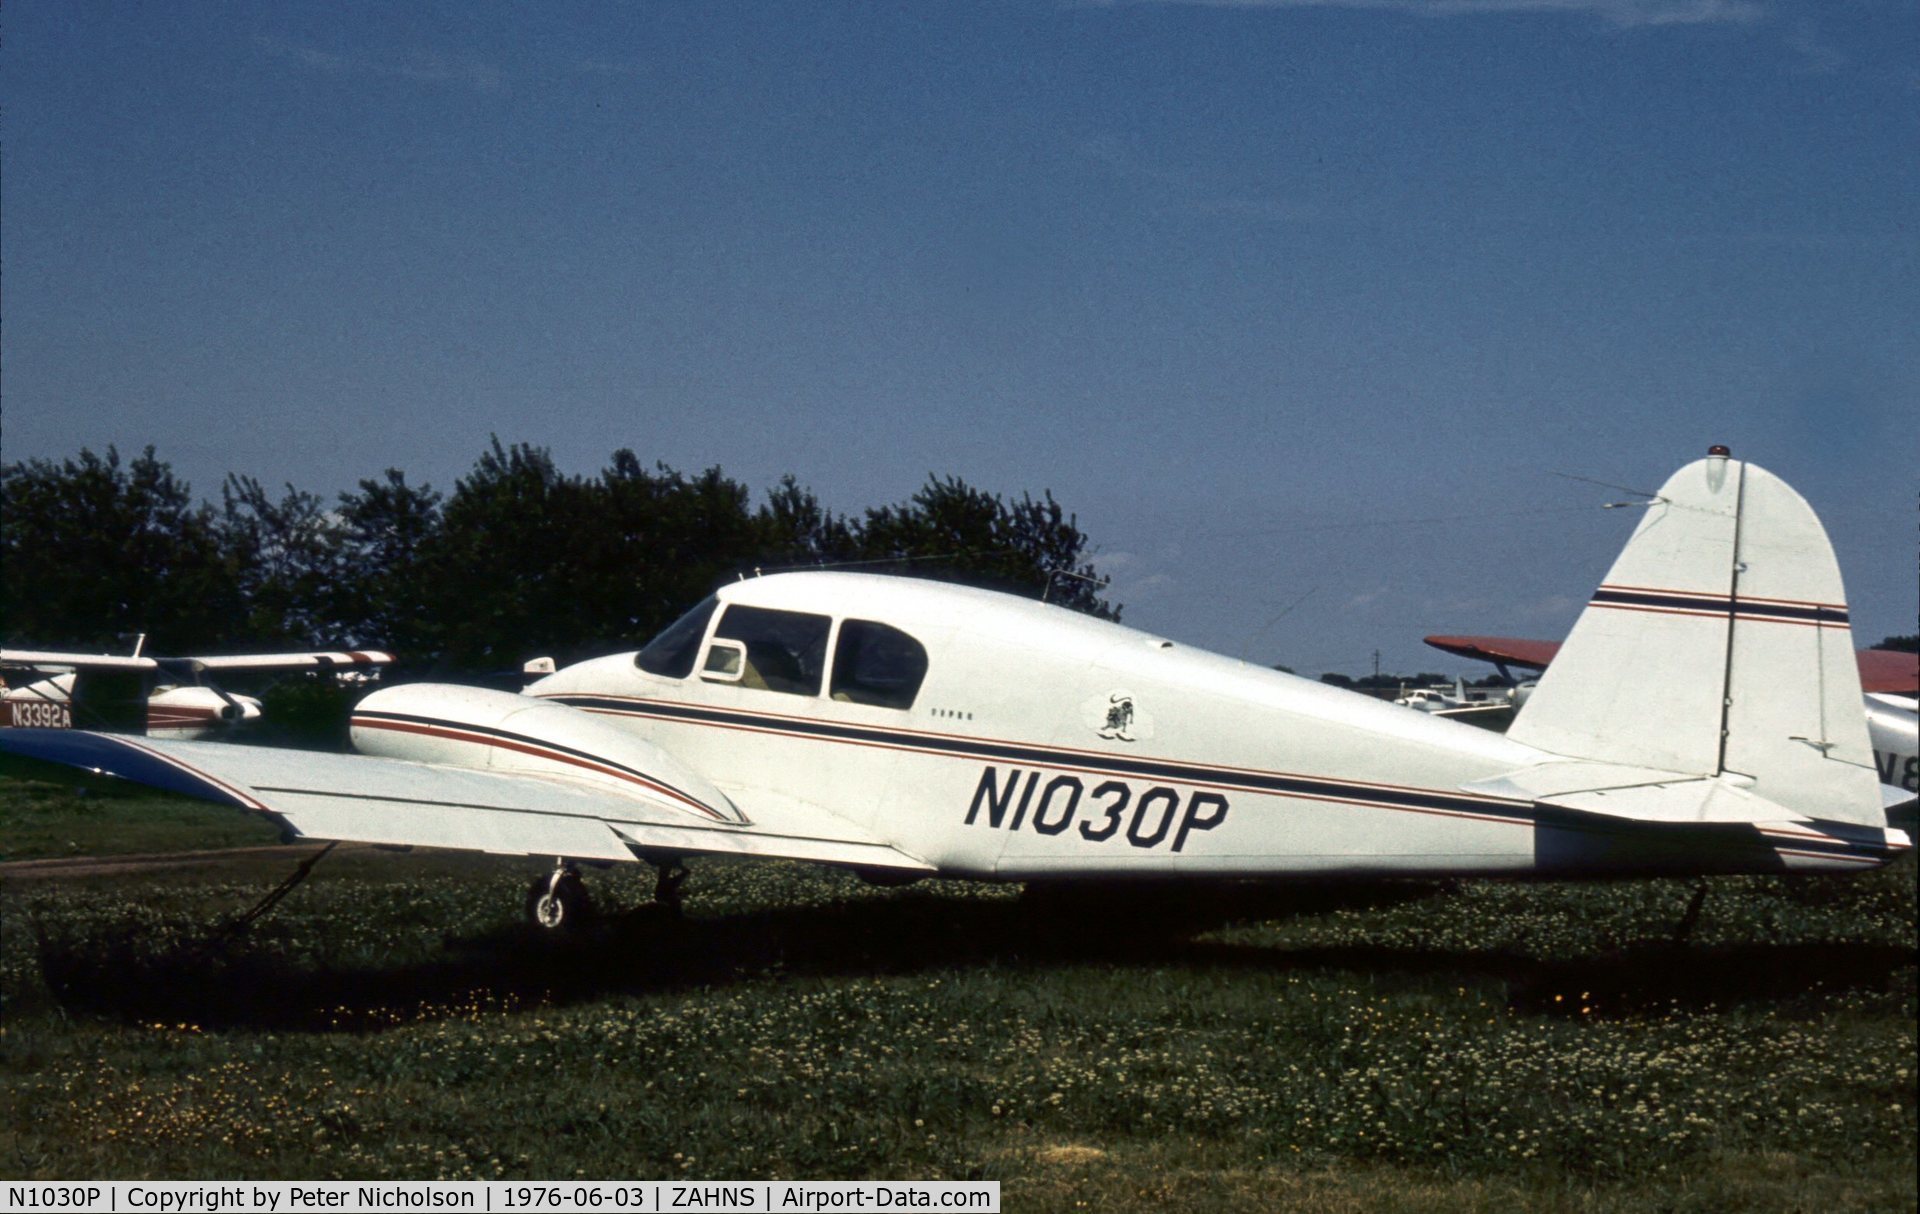 N1030P, Piper PA-23 C/N 2332, This PA-23 Apache was parked at Zahns Airport, Amityville, Long Island in the Summer of 1976. The airport closed in 1980.